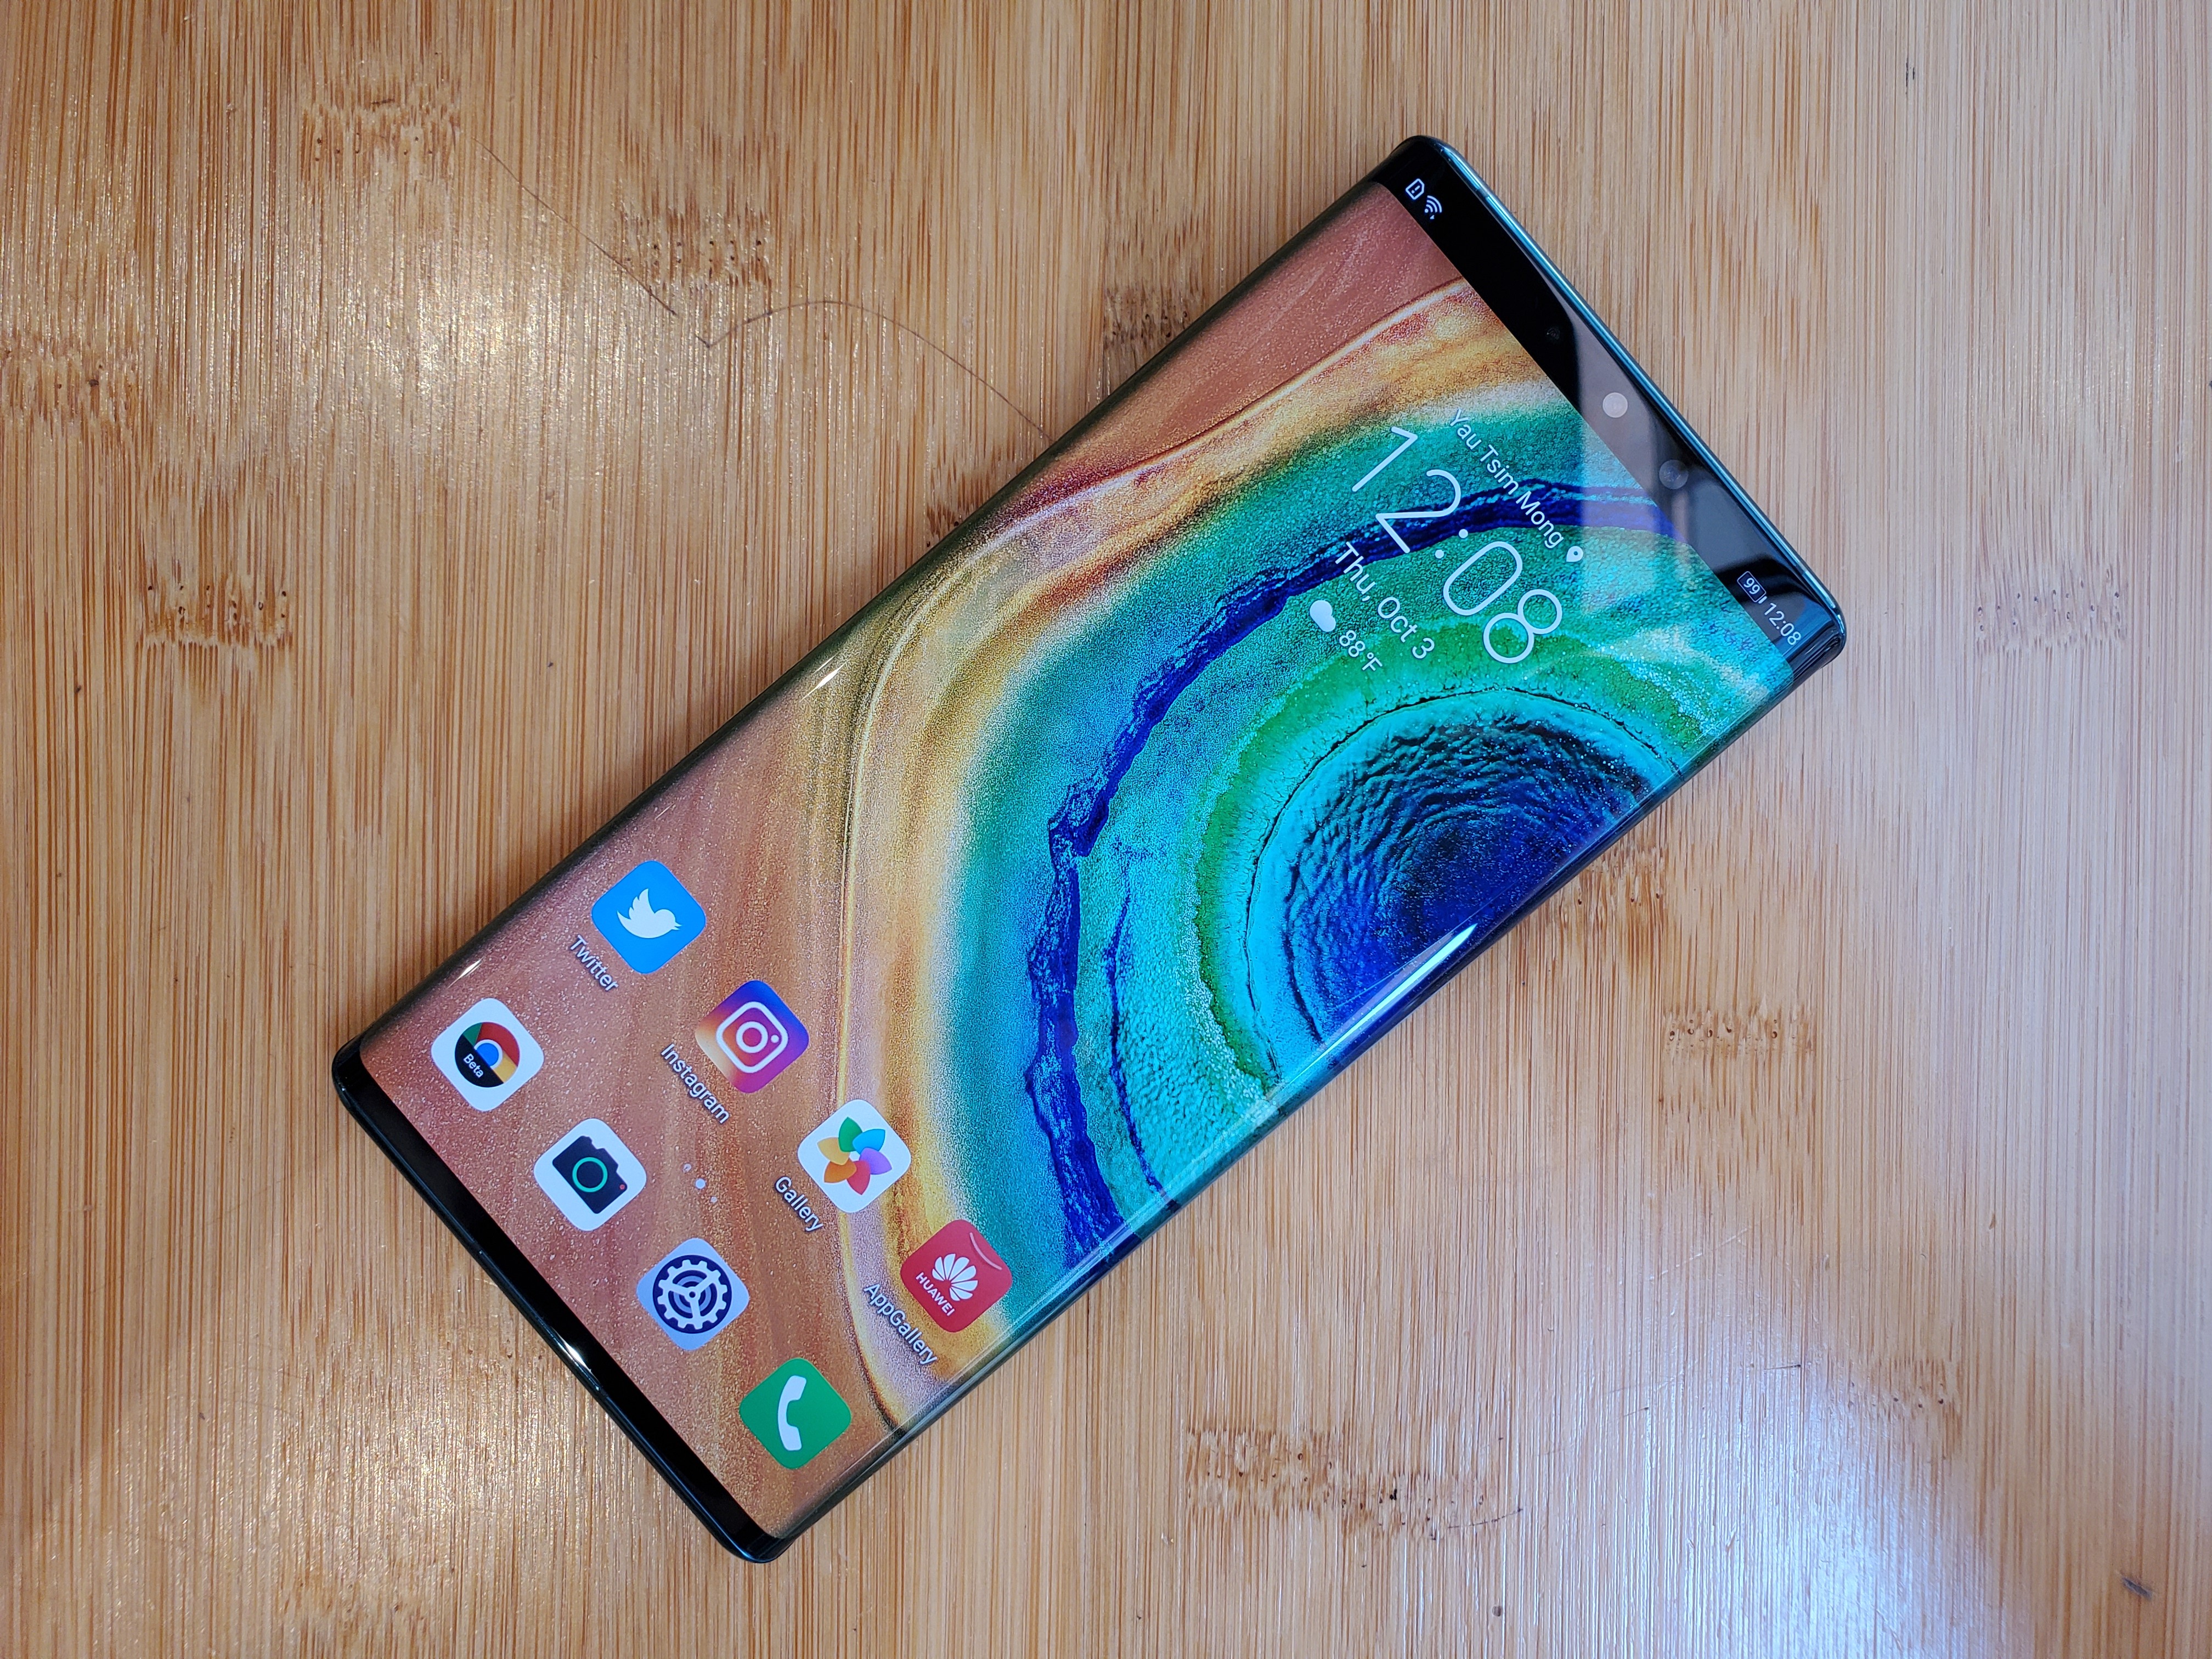 Fabriek bak religie Huawei Mate 30 Pro full review: excellent handset, but lack of Google apps  will be a deal-breaker for many | South China Morning Post